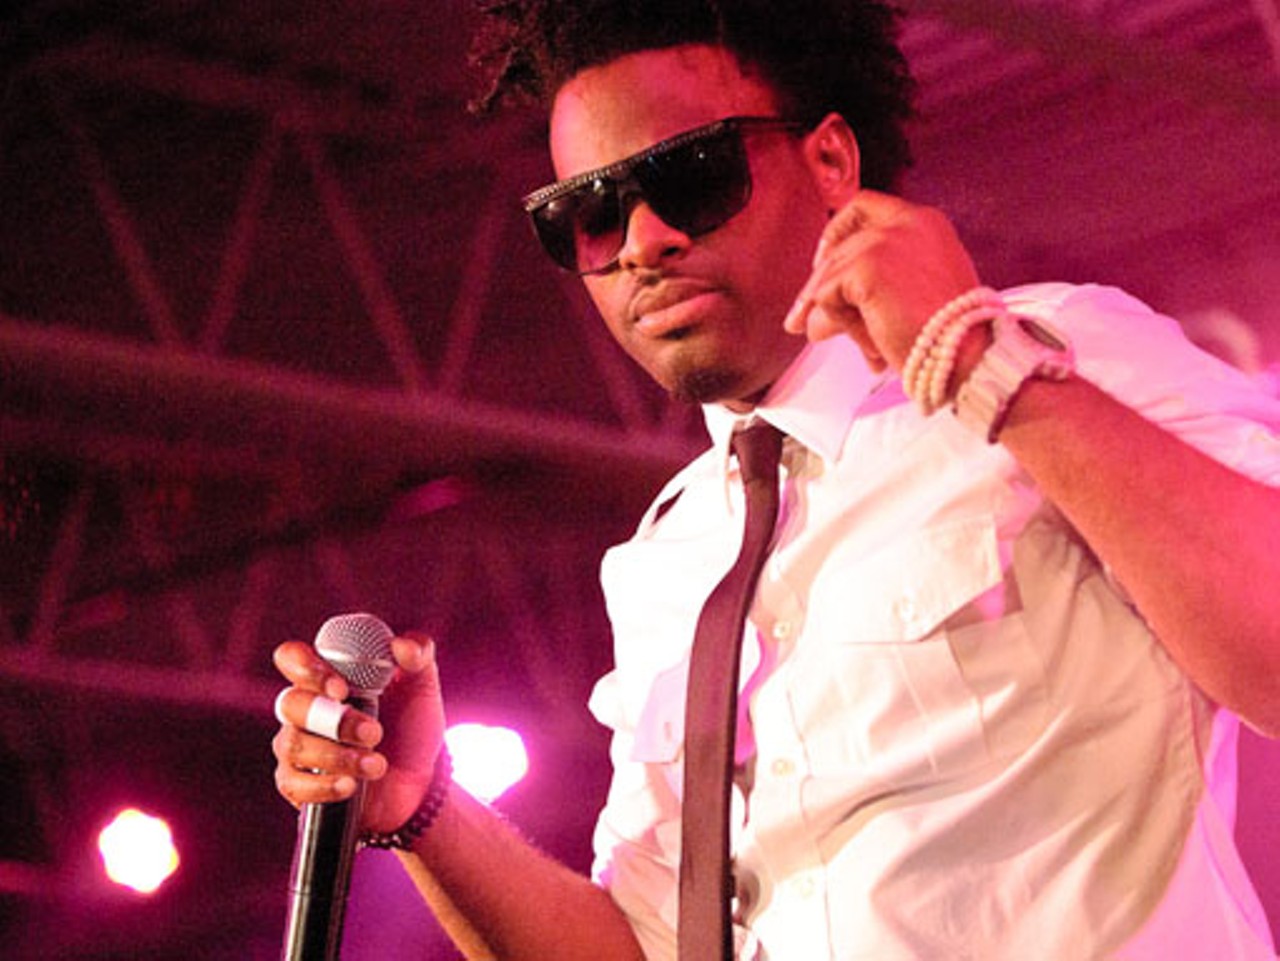 Bradd Young, performing at the Traffic Music Awards.